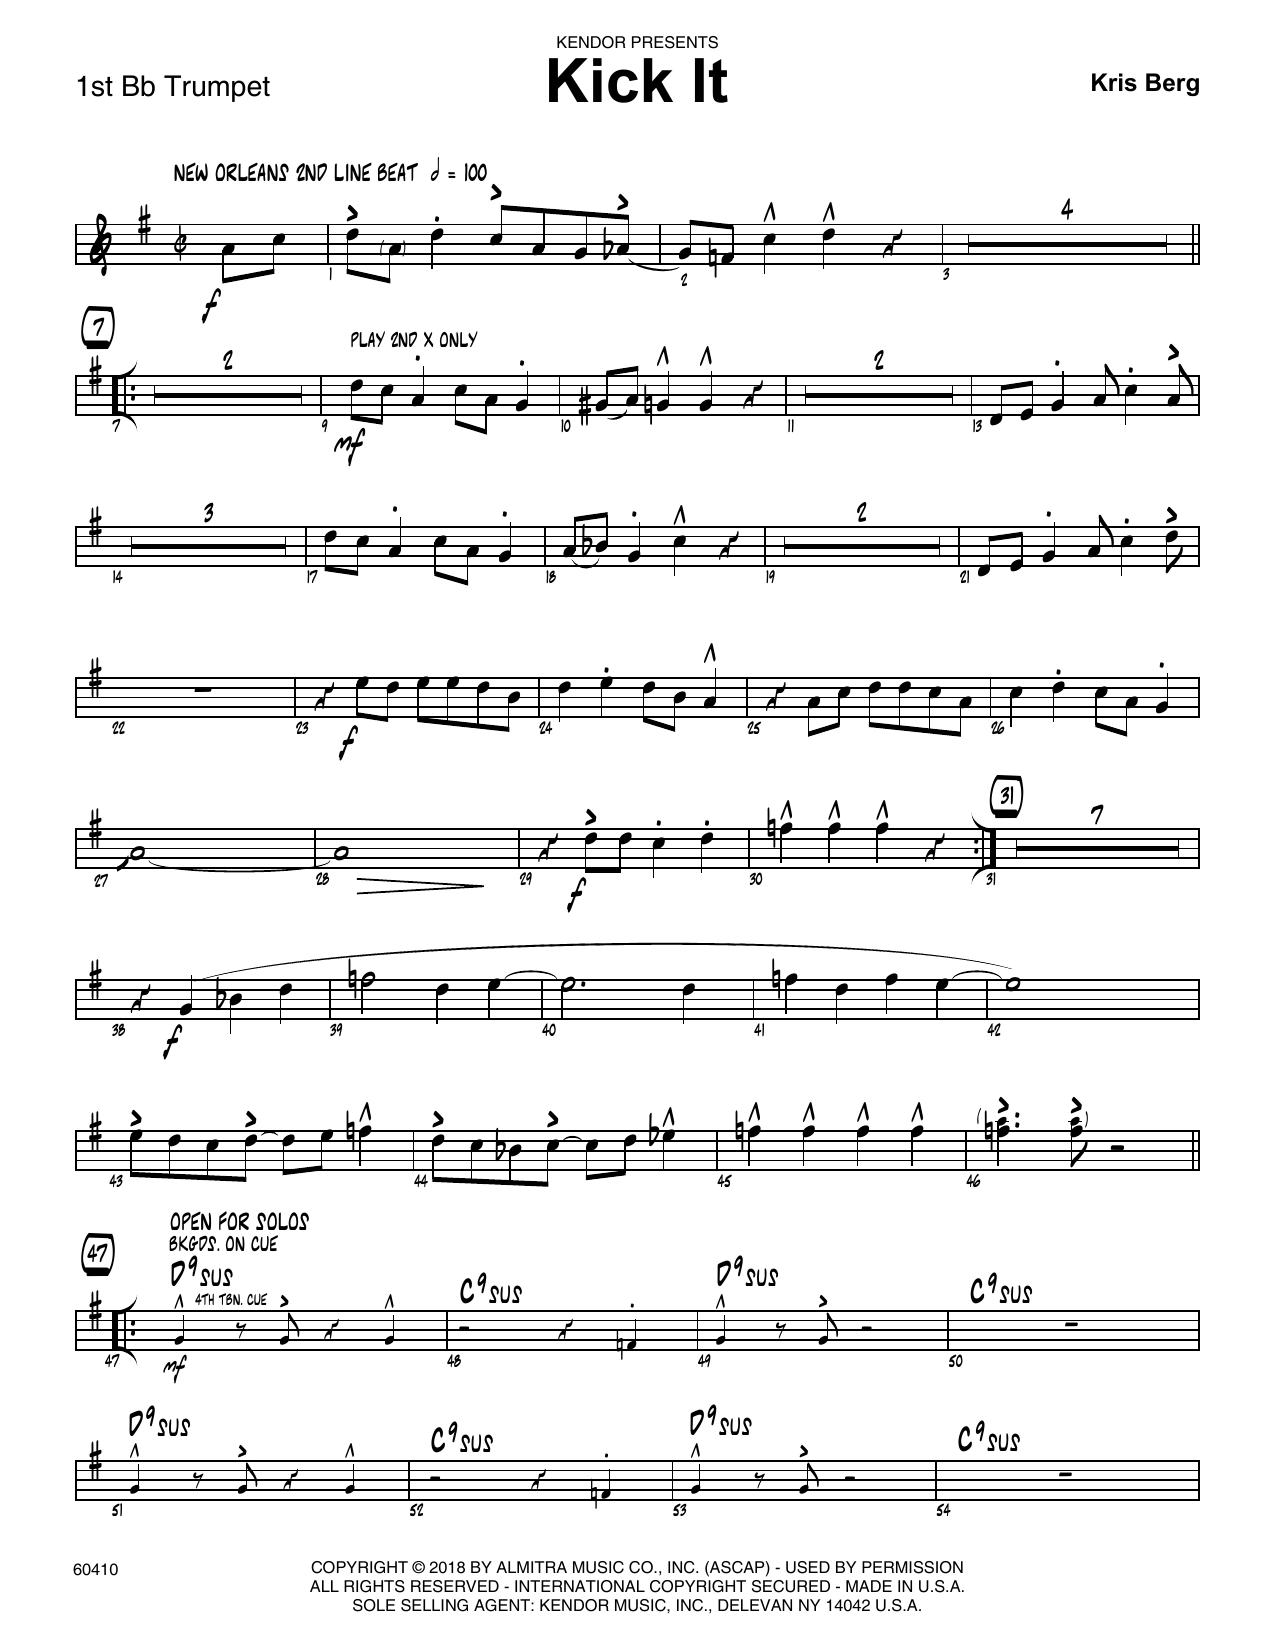 Kris Berg Kick It - 1st Bb Trumpet sheet music preview music notes and score for Jazz Ensemble including 3 page(s)